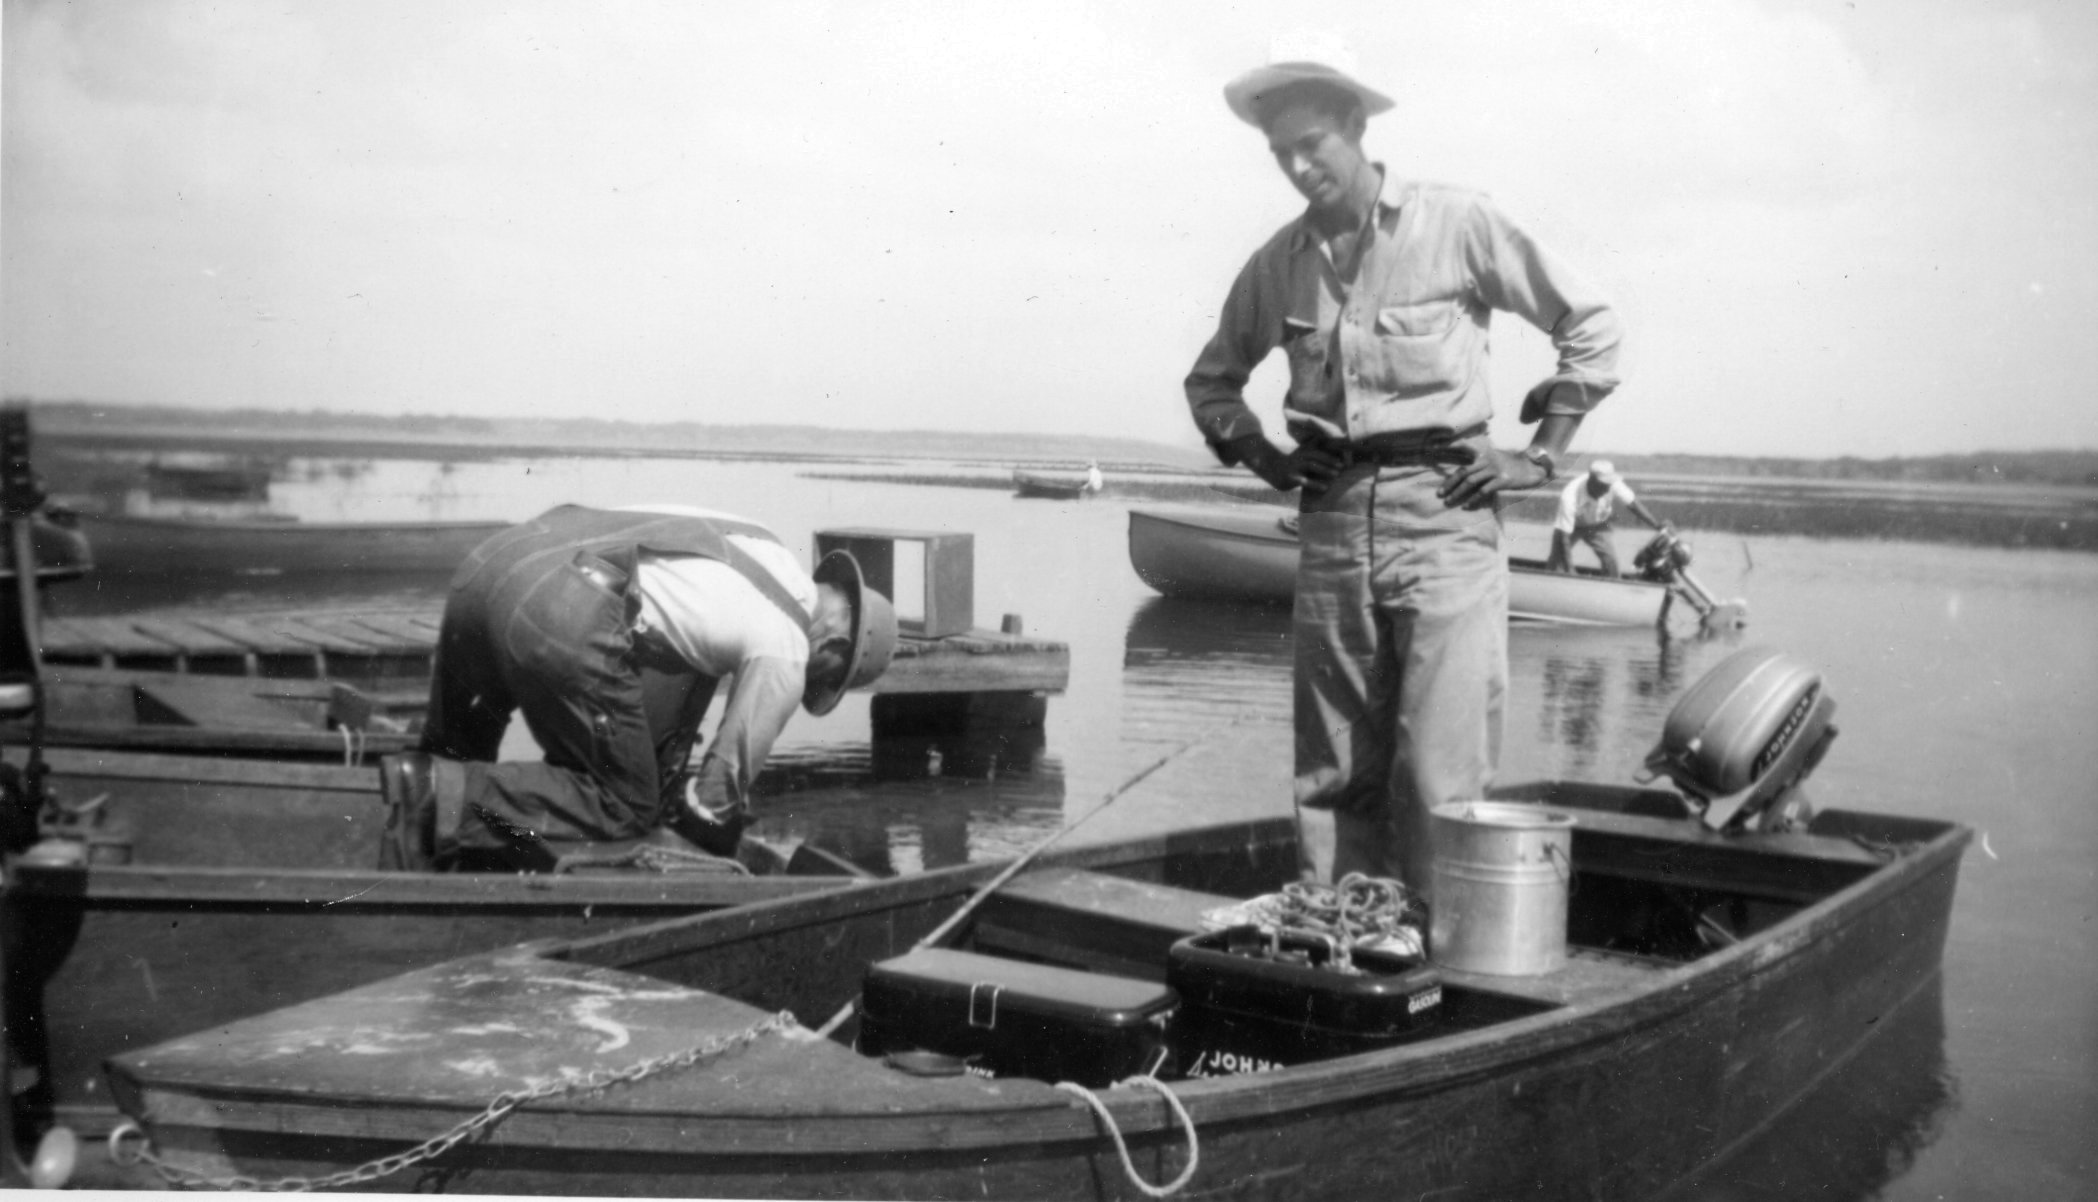 Putting in at Lake Jackson, August 1950